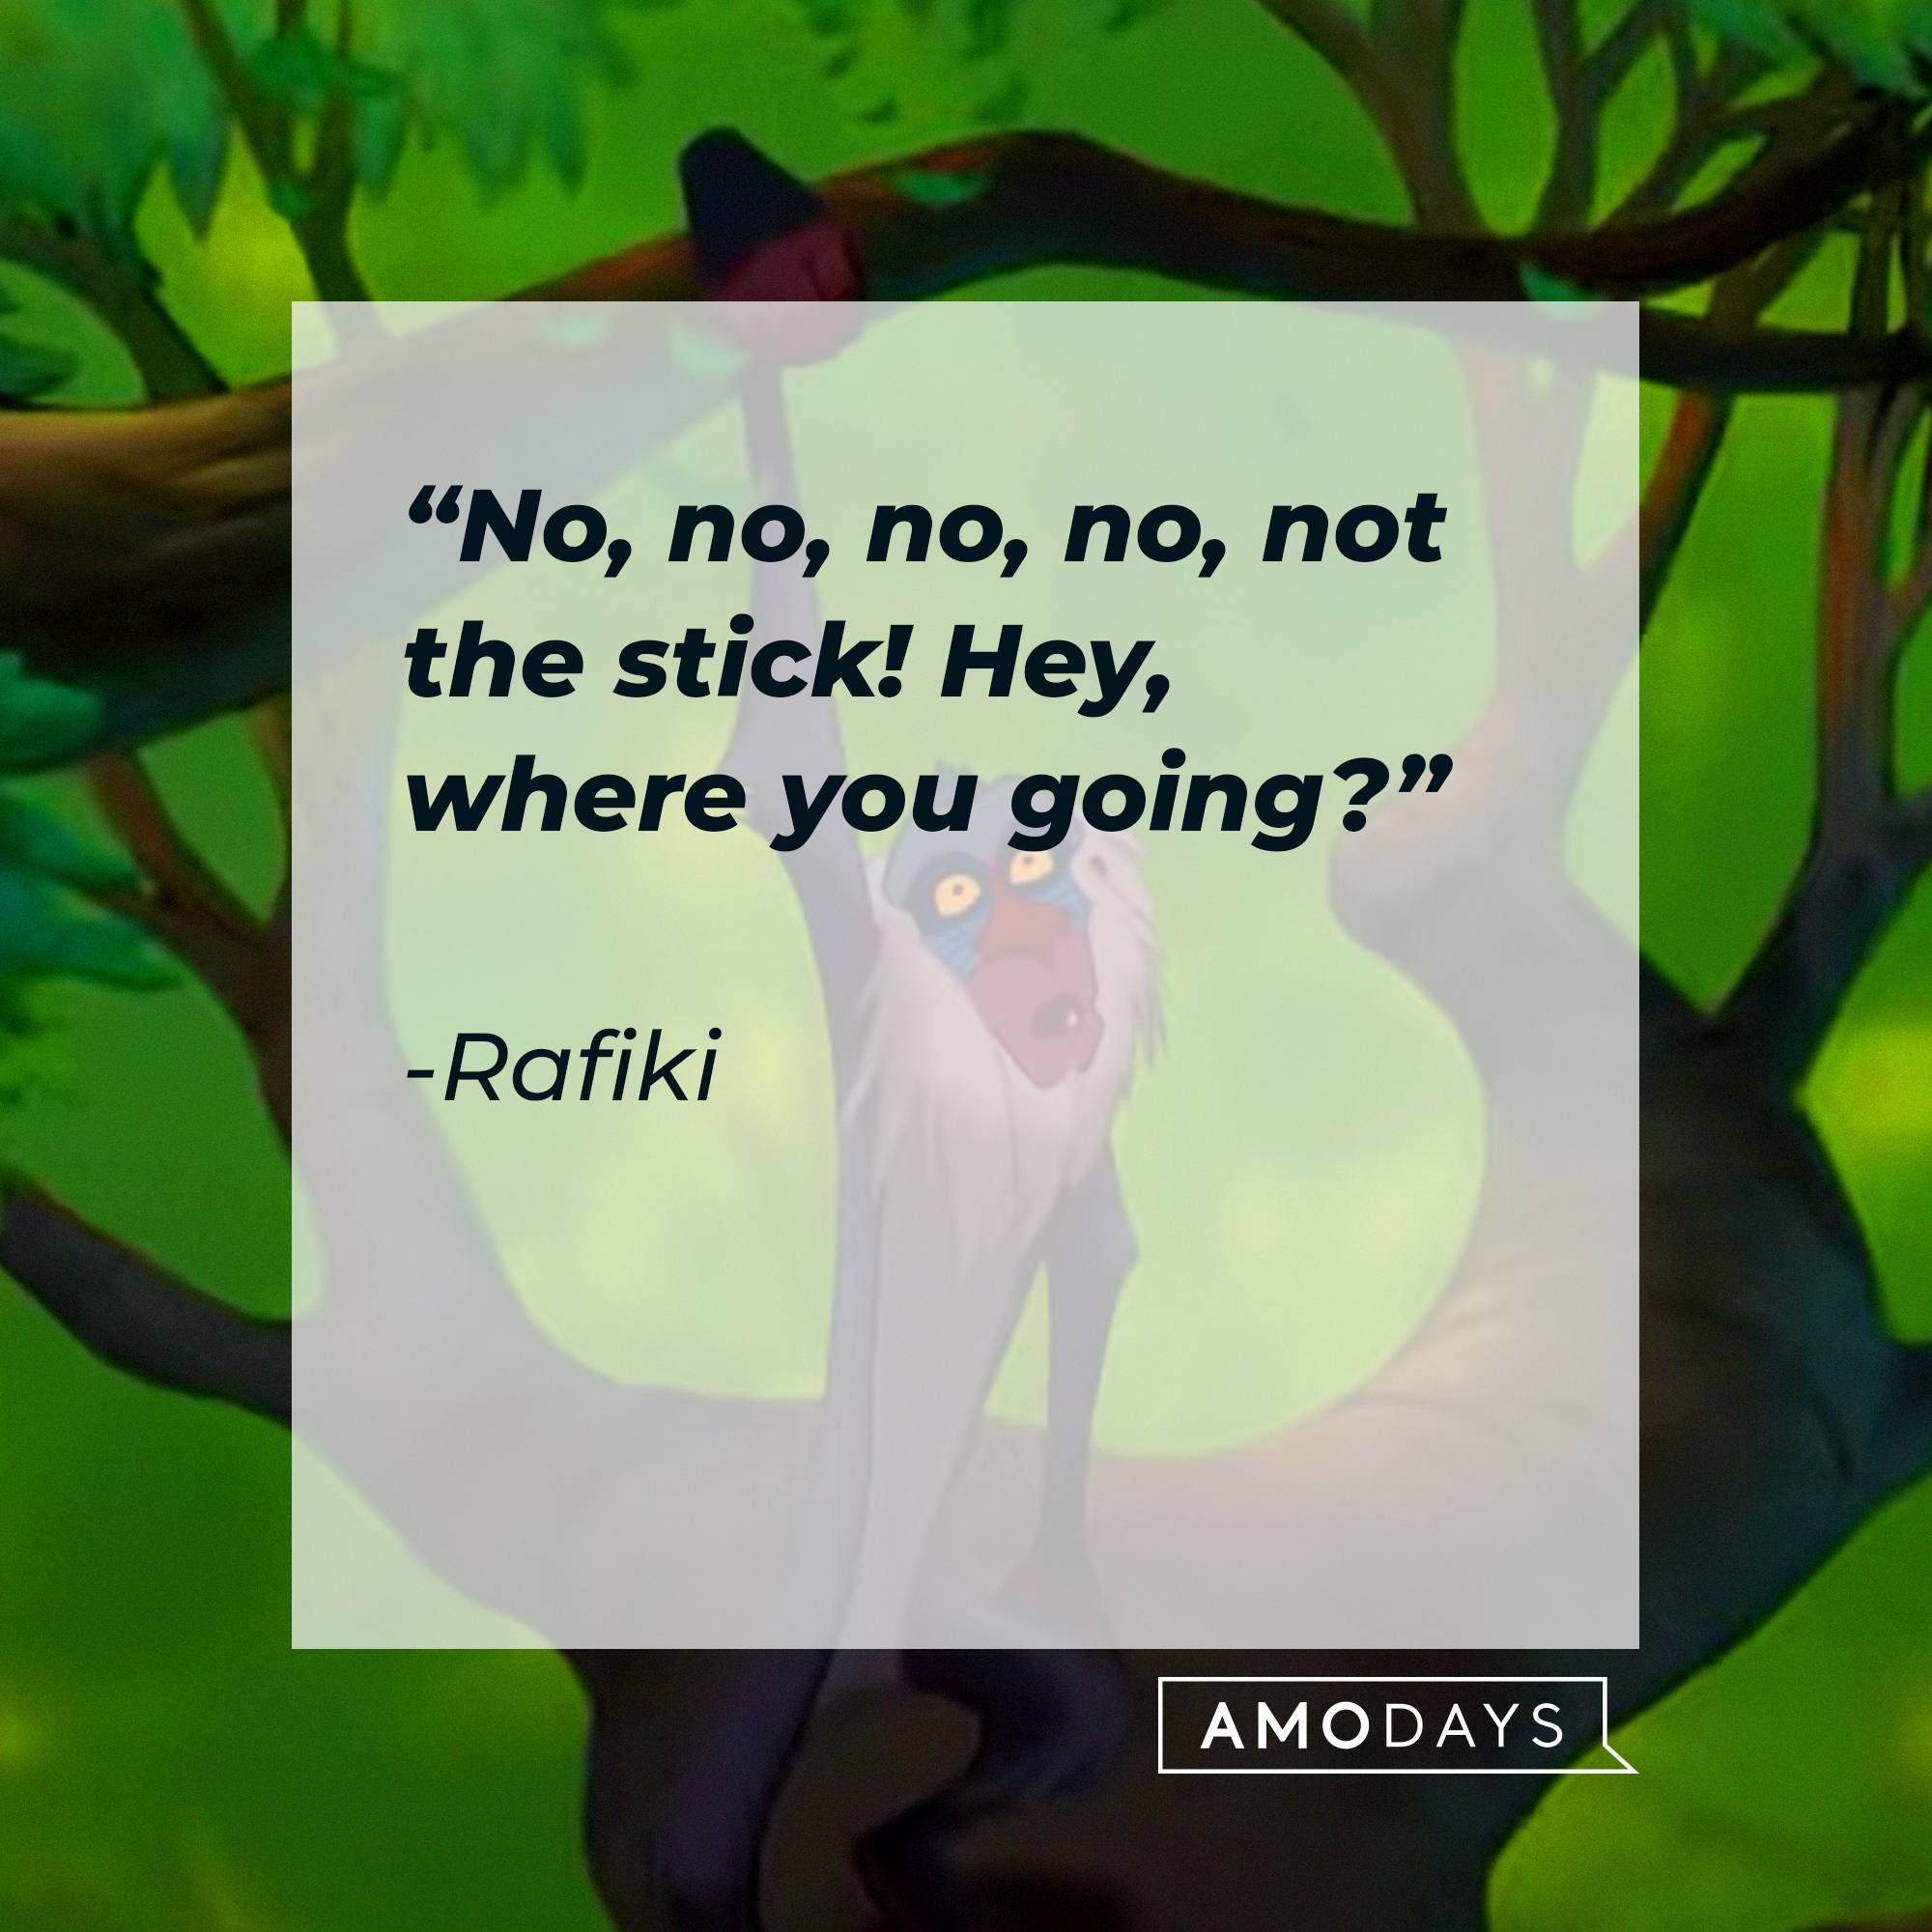 Rafiki's quote: "No, no, no, no, not the stick! Hey, where you going?" | Source: Facebook/DisneyTheLionKing